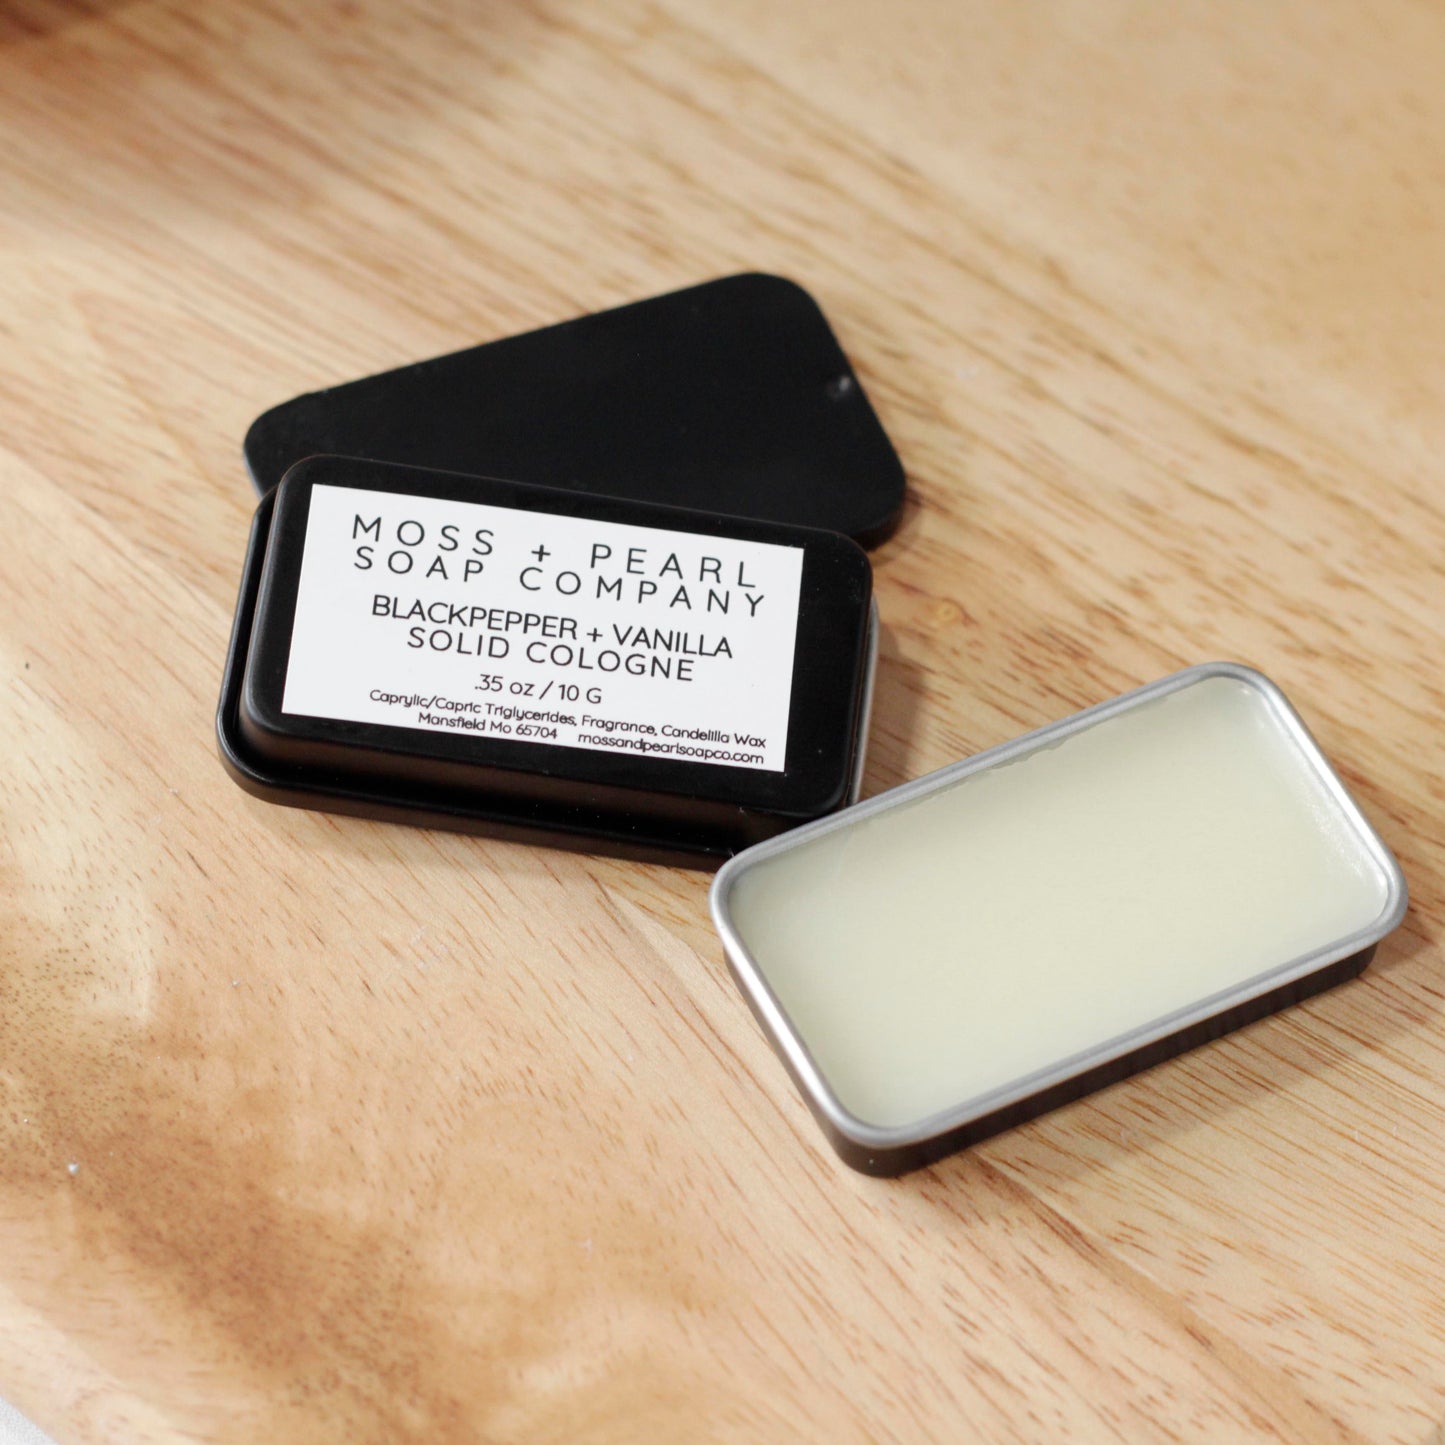 SOLID PERFUME + COLOGNE Moss + Pearl Soap Company